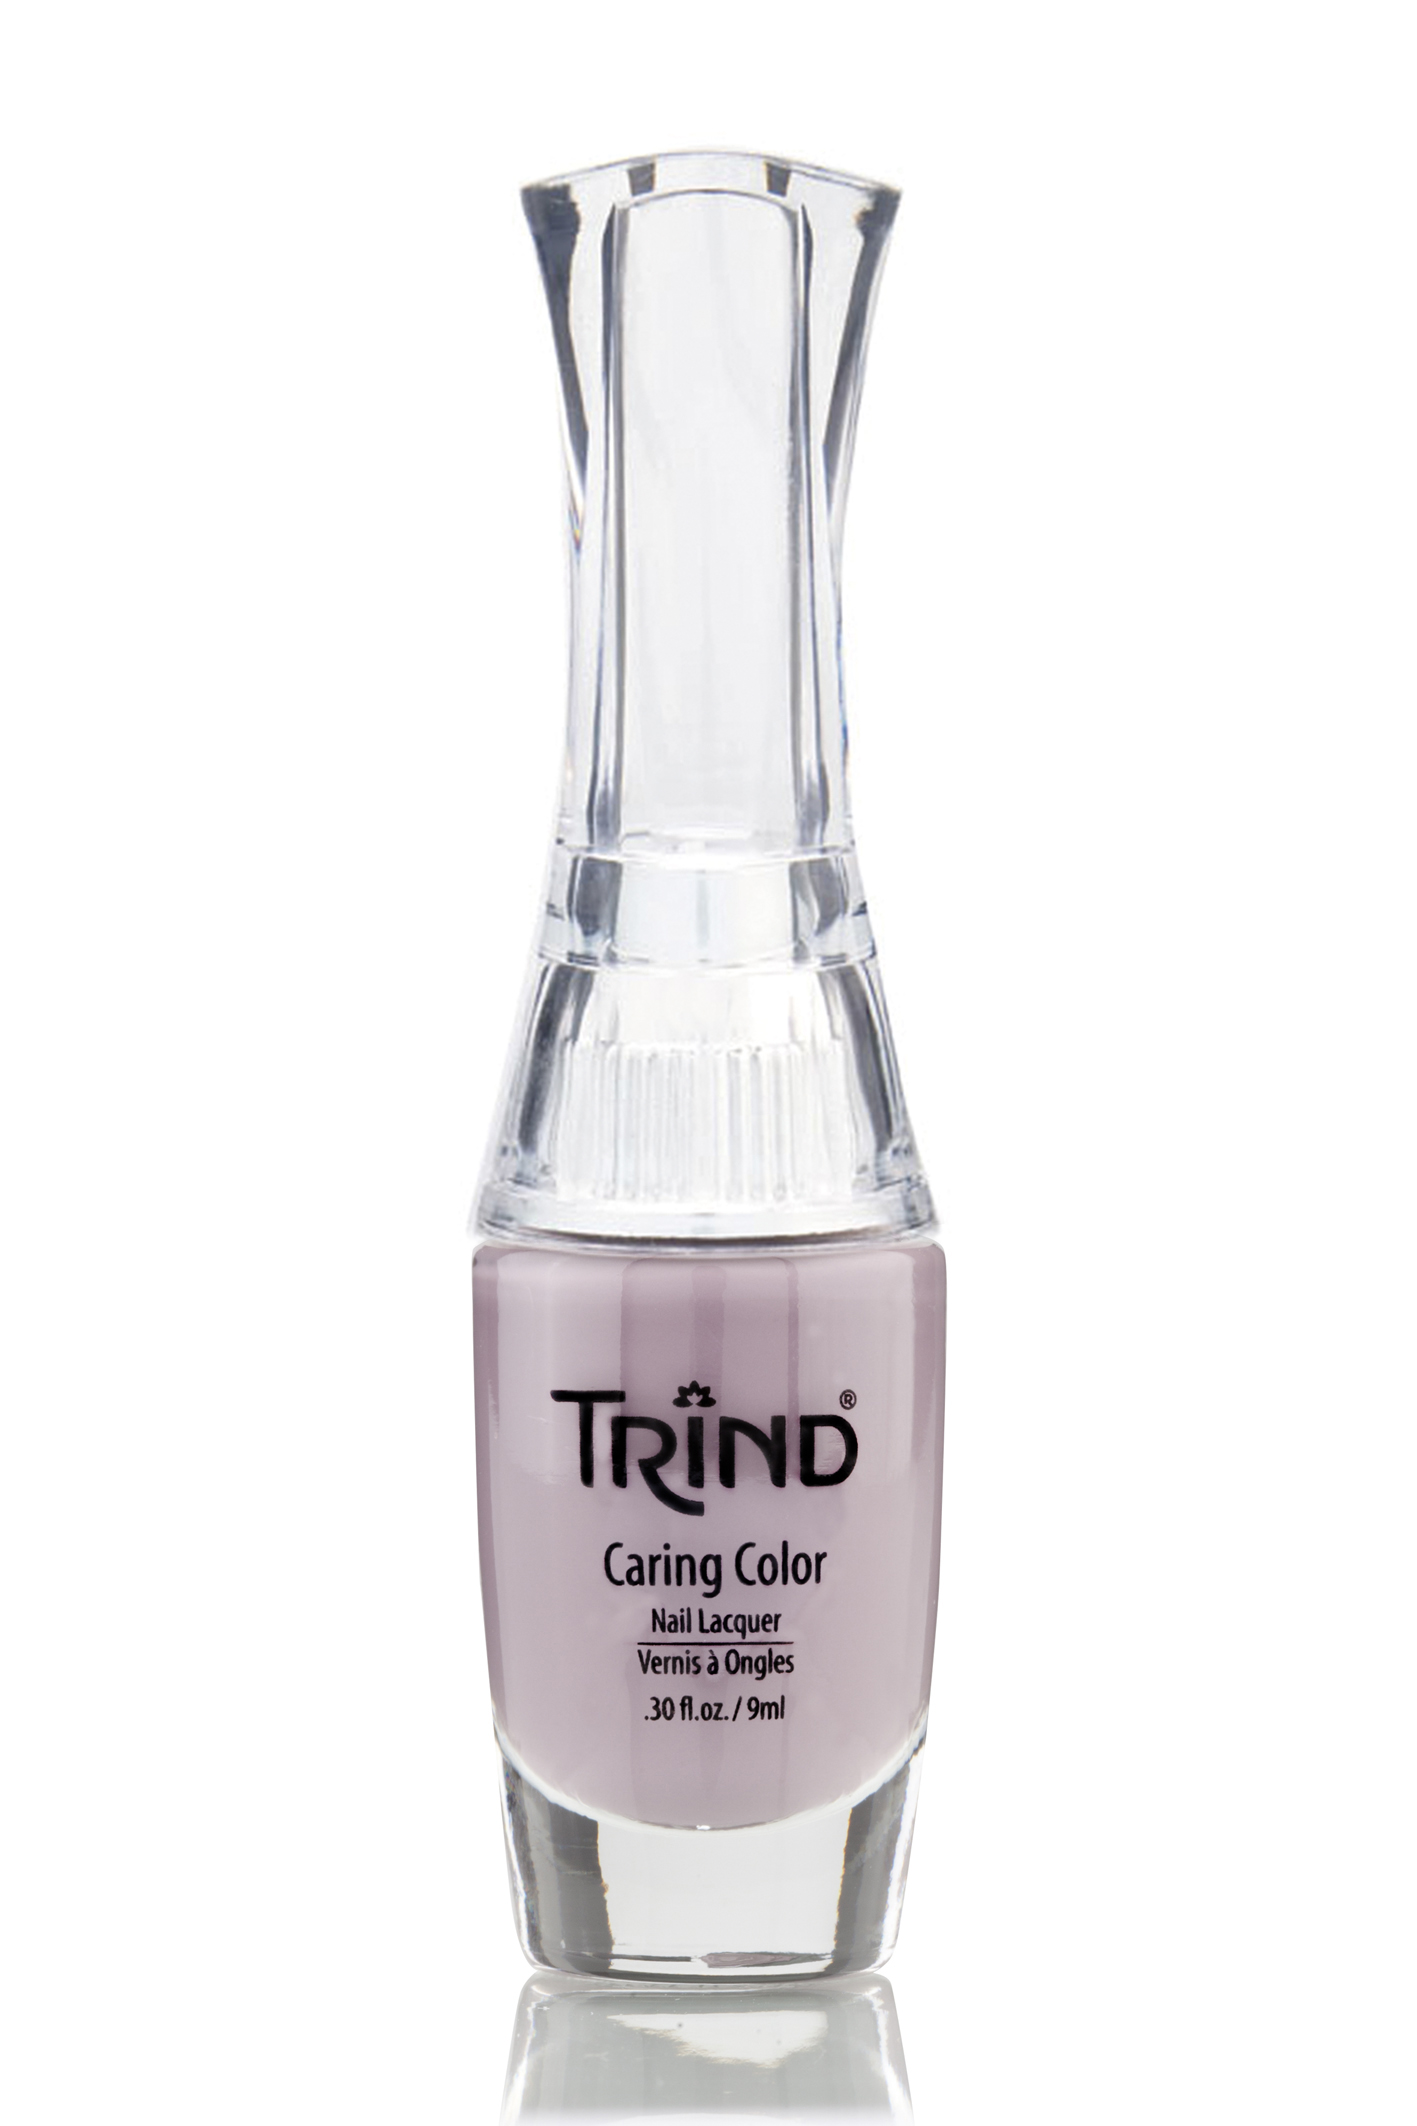 Trind Caring Color Nail Lacquer CC179